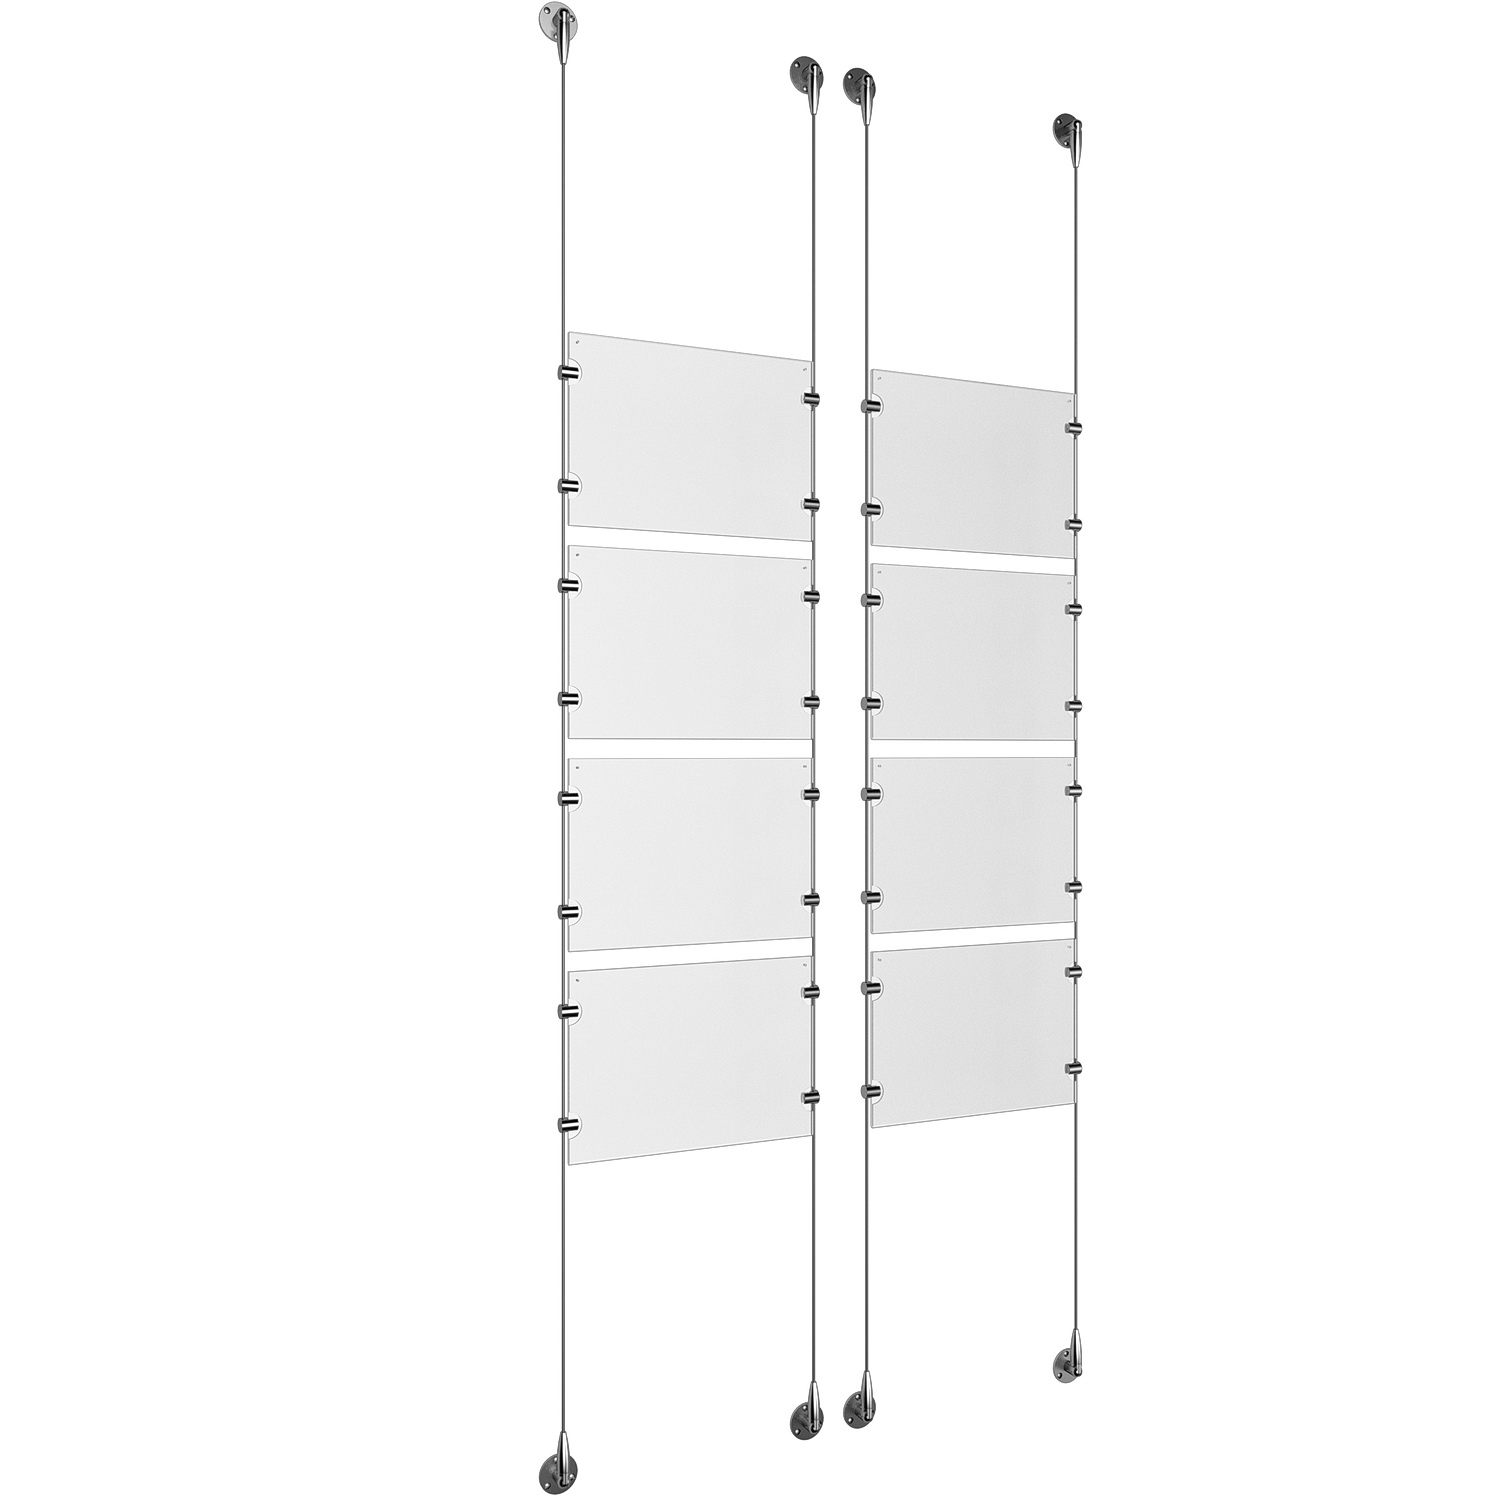 (8) 11'' Width x 8-1/2'' Height Clear Acrylic Frame & (4) Stainless Steel Satin Brushed Adjustable Angle Signature 1/8'' Cable Systems with (32) Single-Sided Panel Grippers